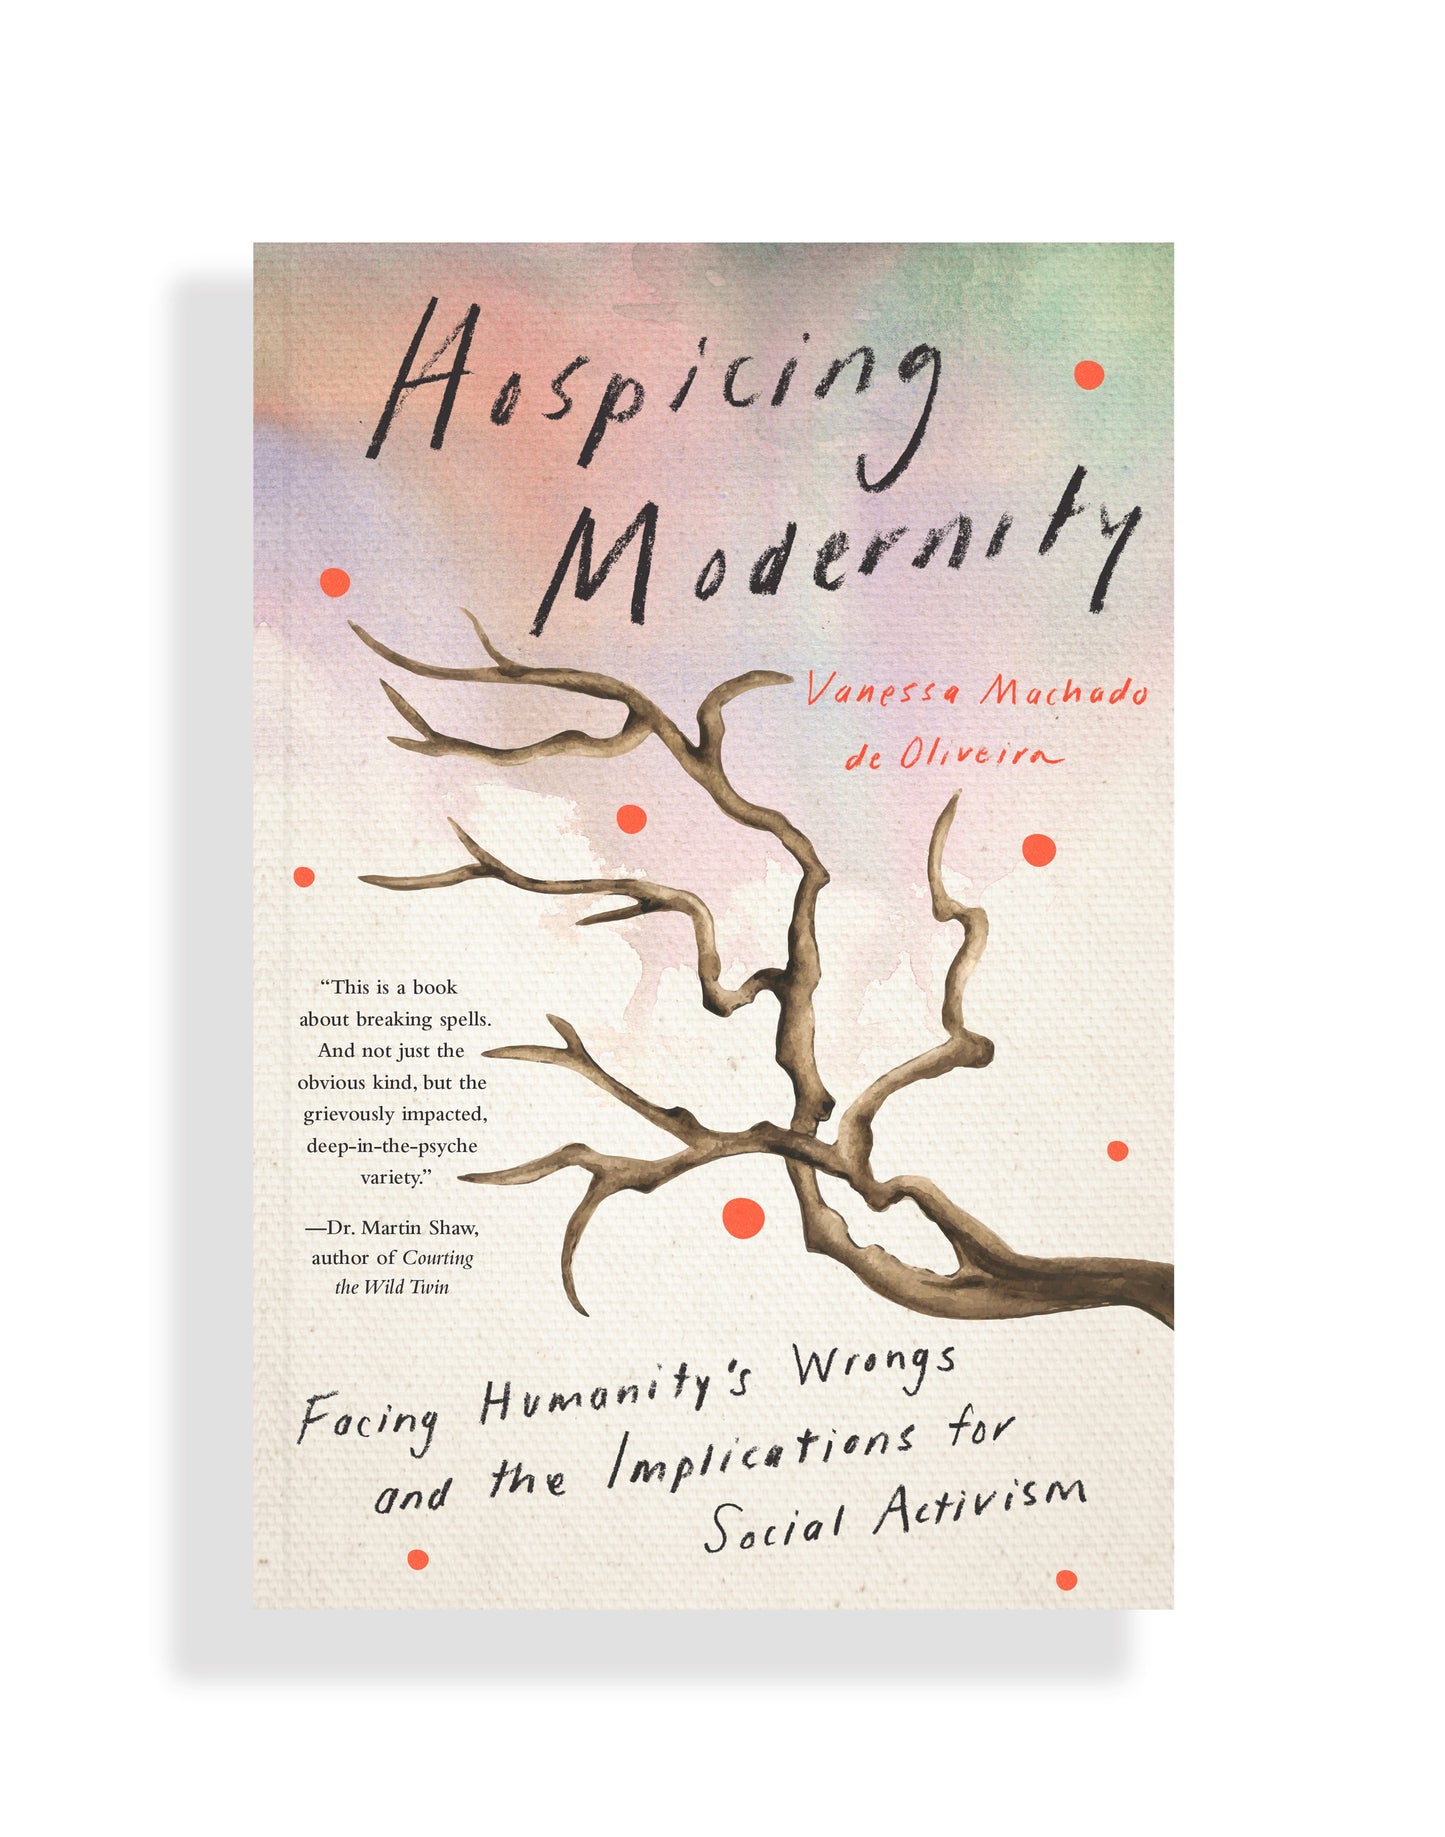 HOSPICING MODERNITY: FACING HUMANITY'S WRONGS AND THE IMPLICATIONS OF SOCIAL ACTIVISM